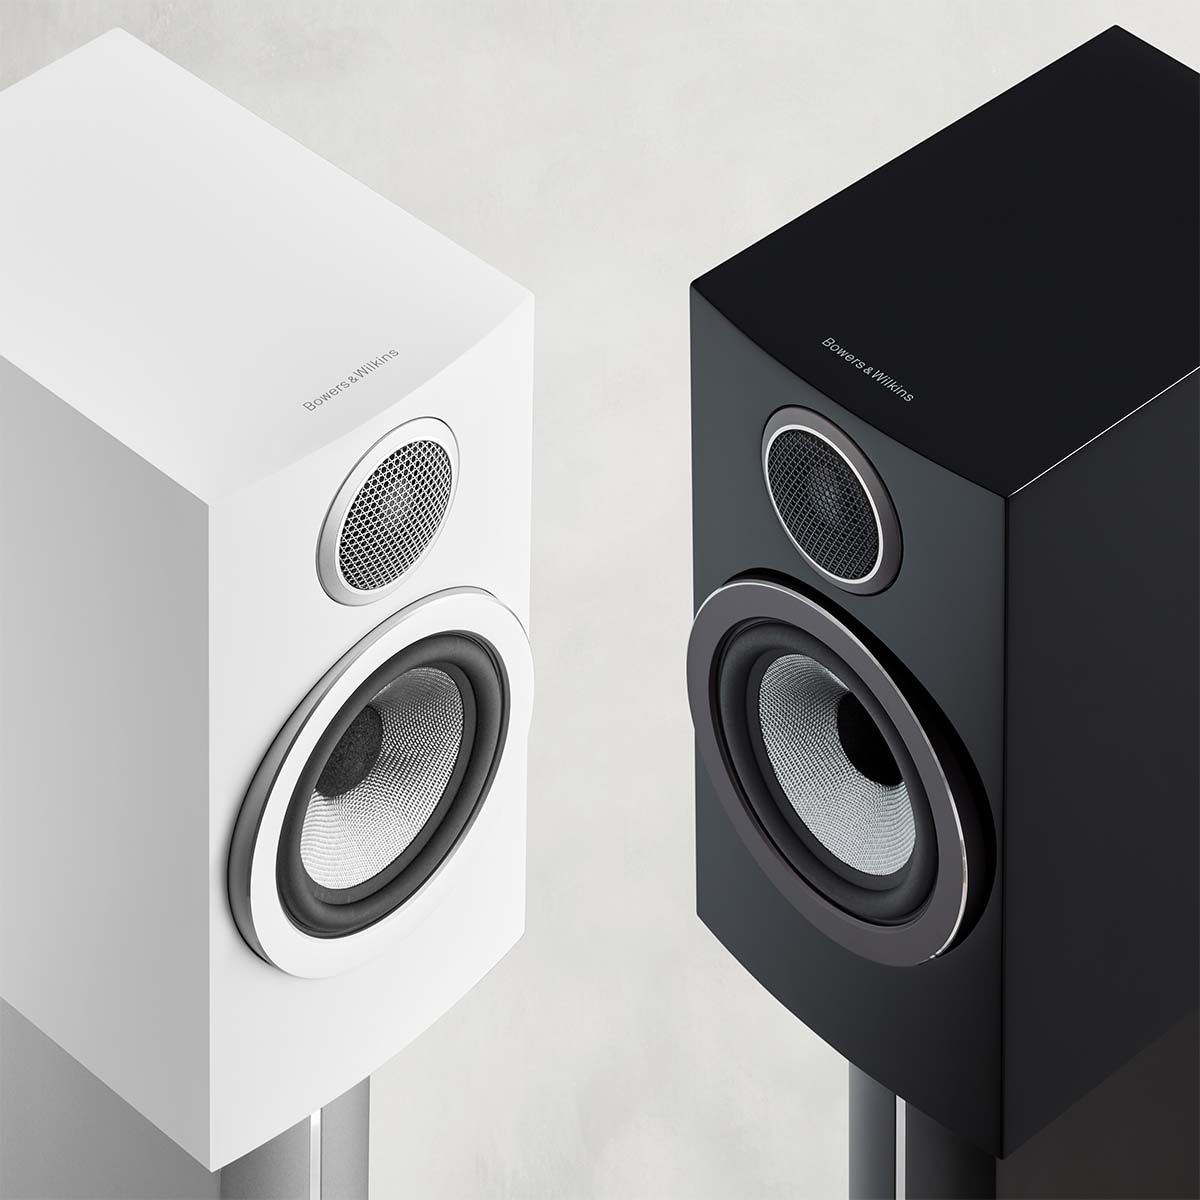 Bowers & Wilkins 707 S3 Bookshelf speakers in black and white on stands